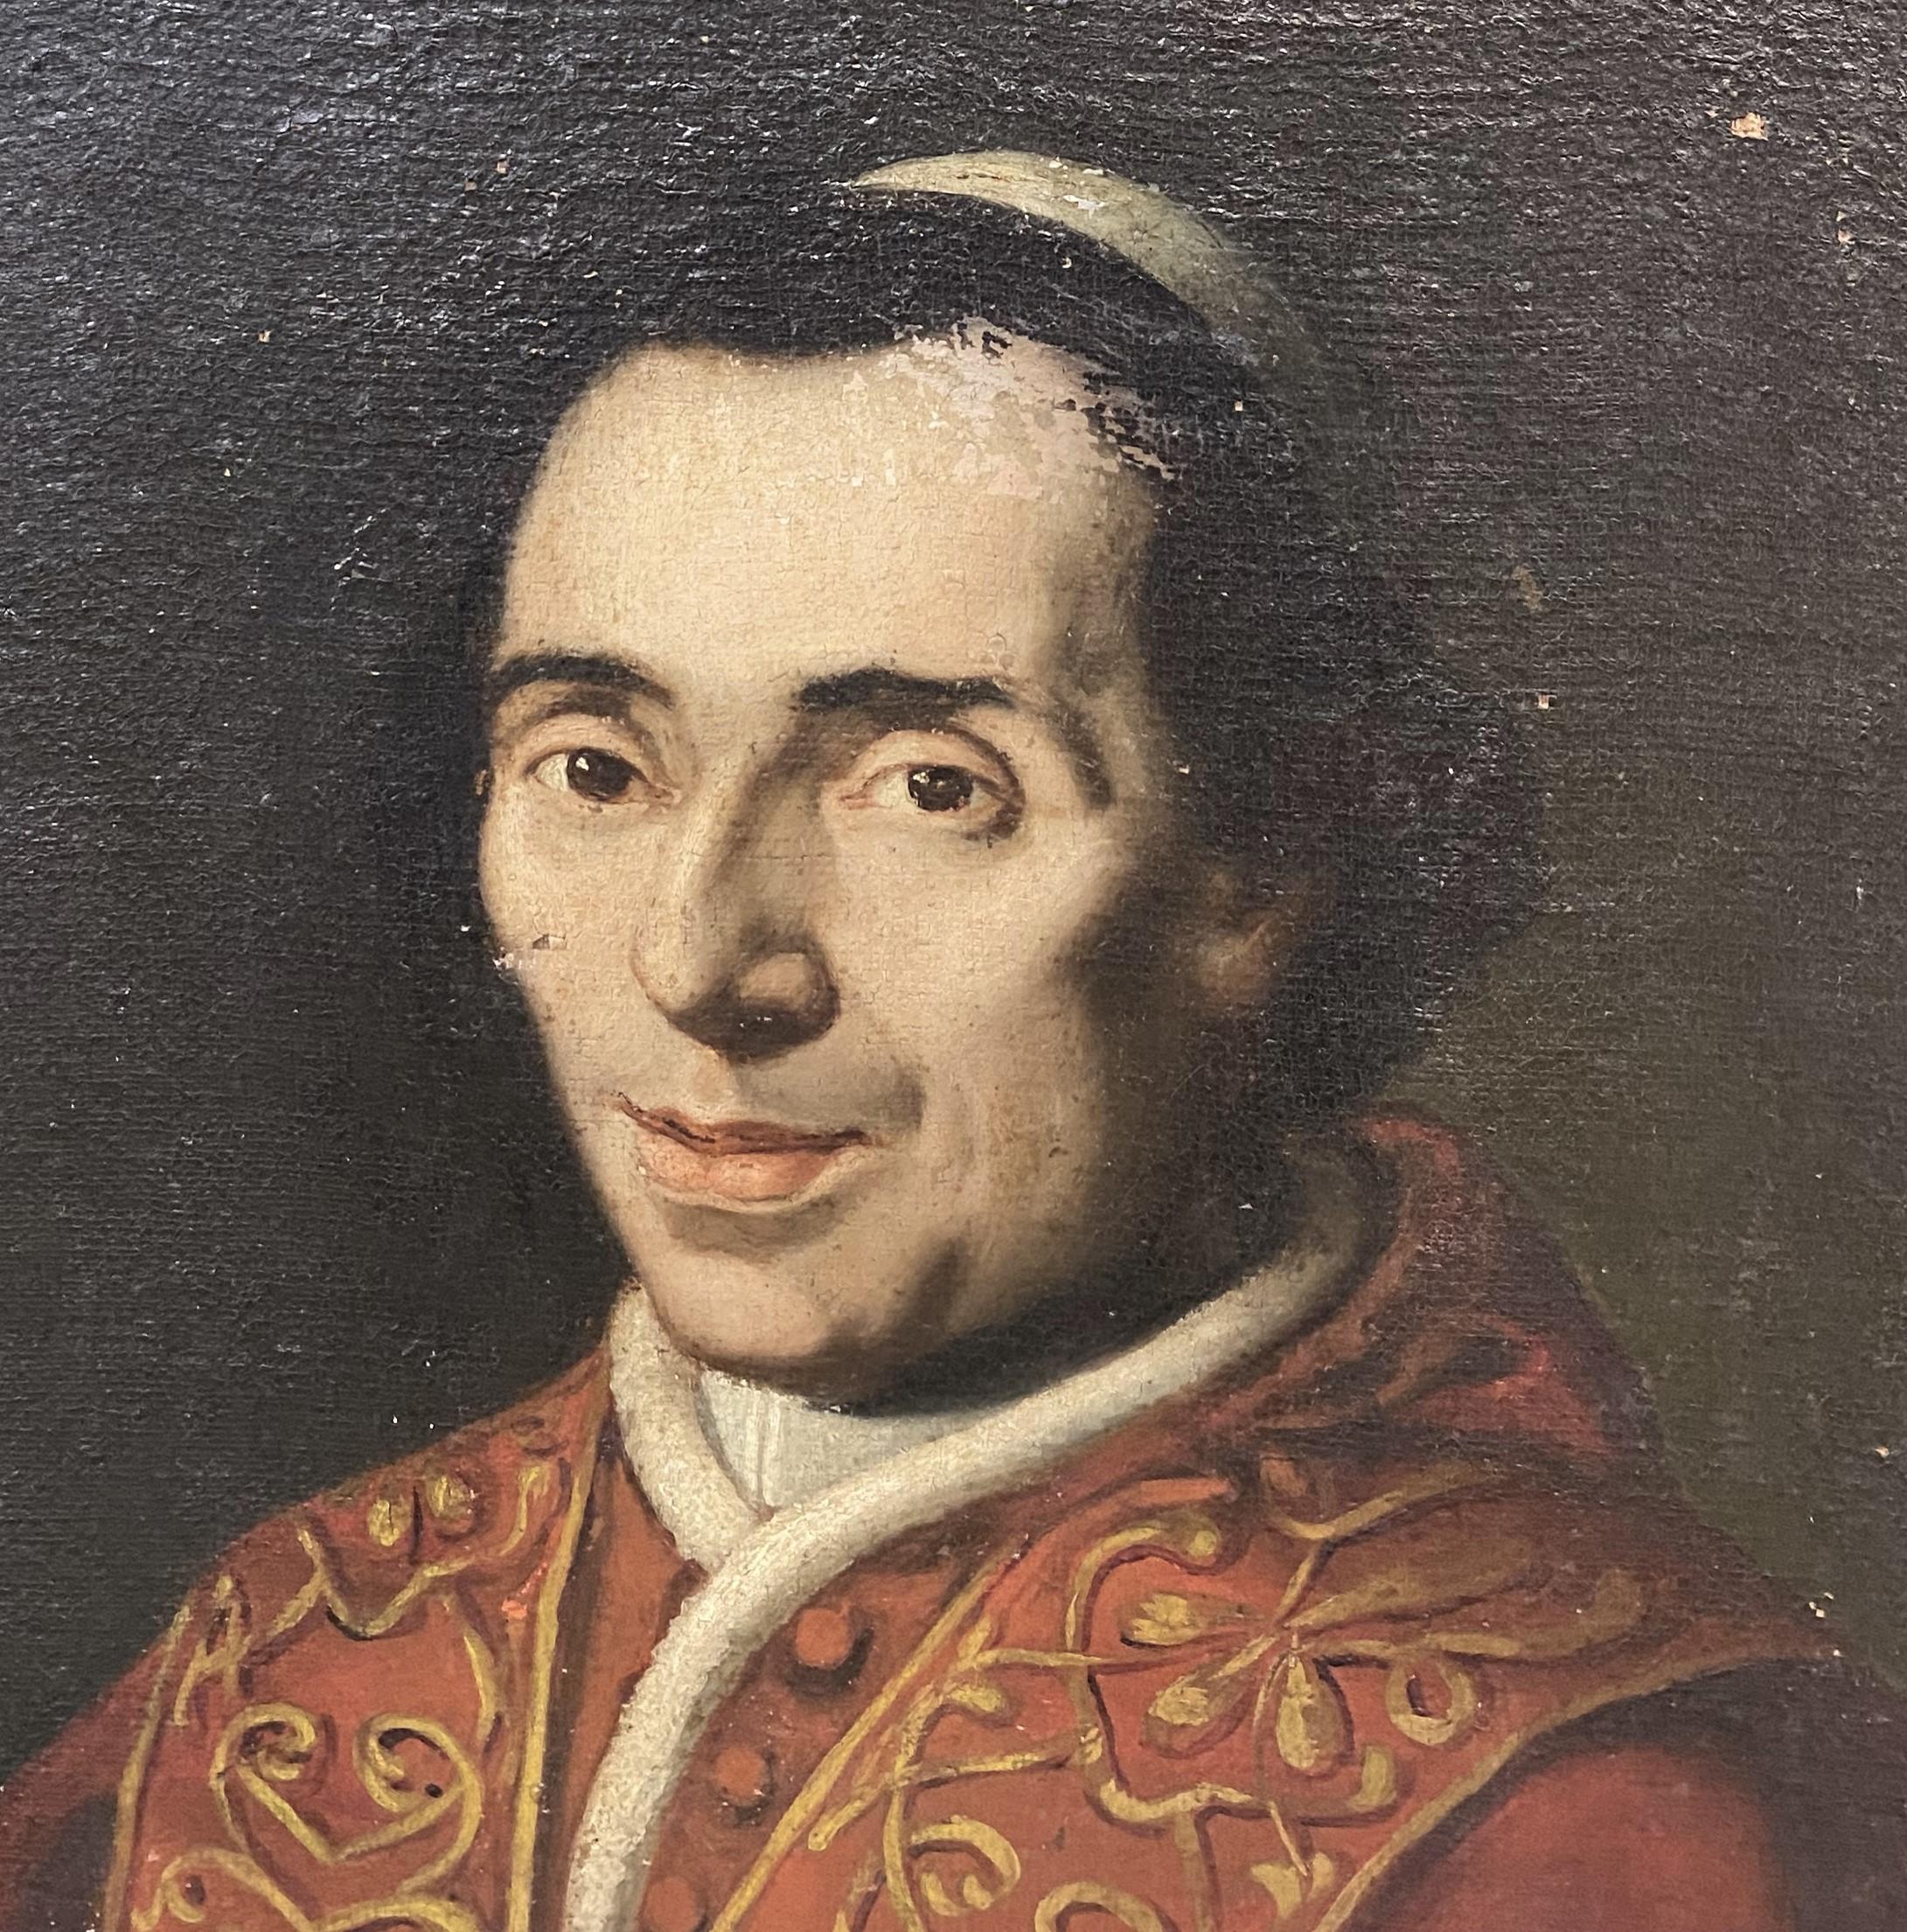 A fine European portrait of a priest, oil on canvas, probably dating to the 17th or 18th century, unsigned, with original stretcher, minor surface losses and damage, craquelure, edge losses, and wear commensurate with age and use. Dimensions: 29.5